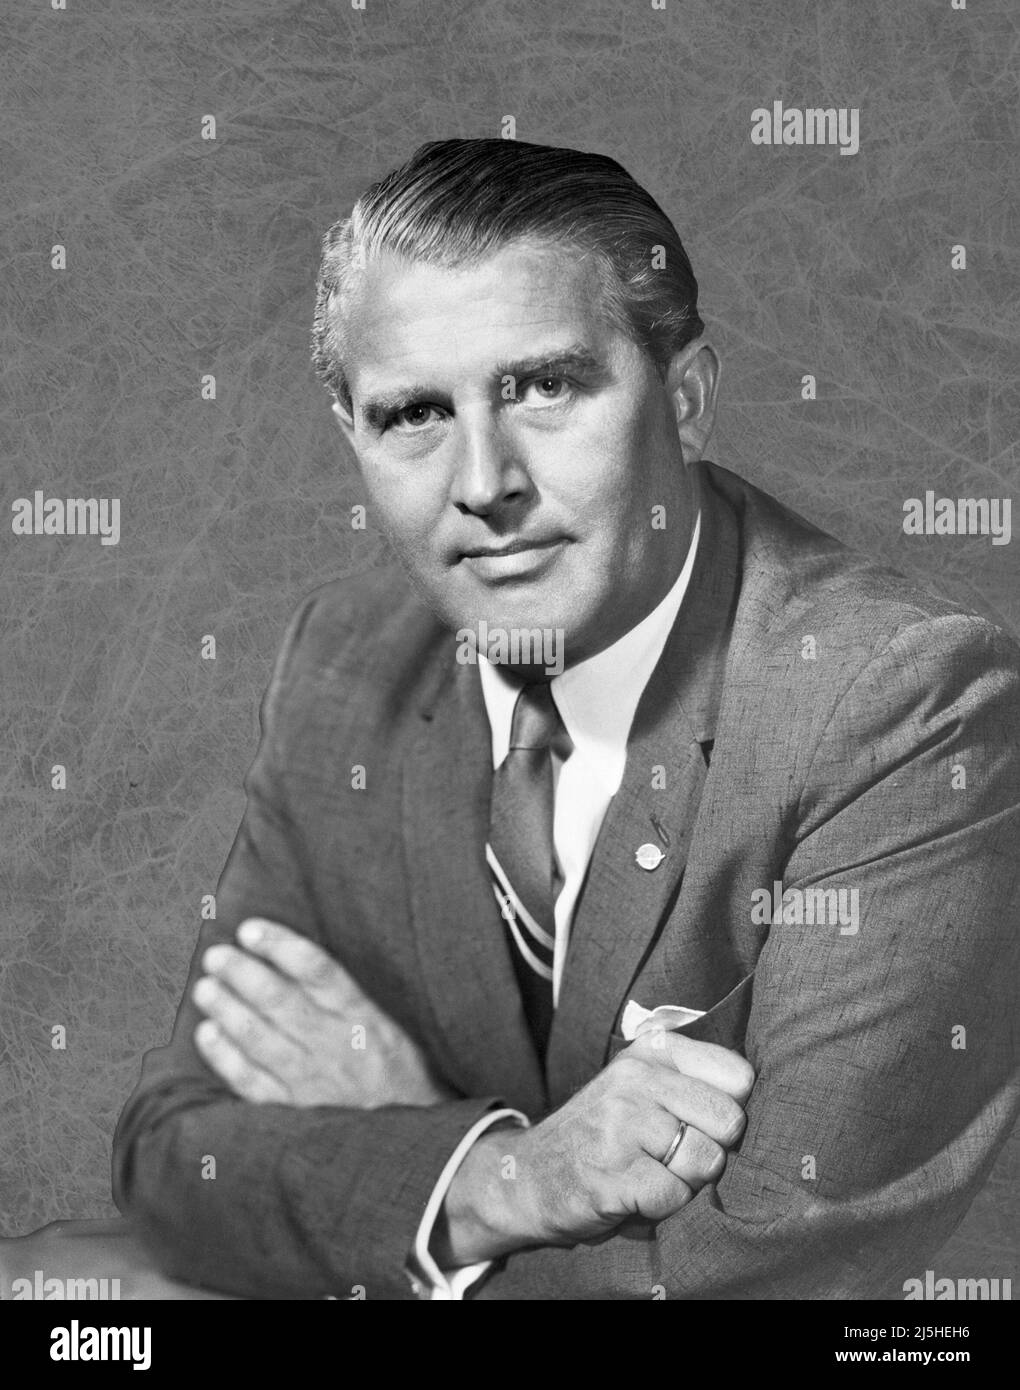 A 1960 portrait of Dr. Wernher von Braun.  Following World War II, Dr. von Braun and his German colleagues arrived in the United States under Project Paperclip to continue their rocket development work. Stock Photo